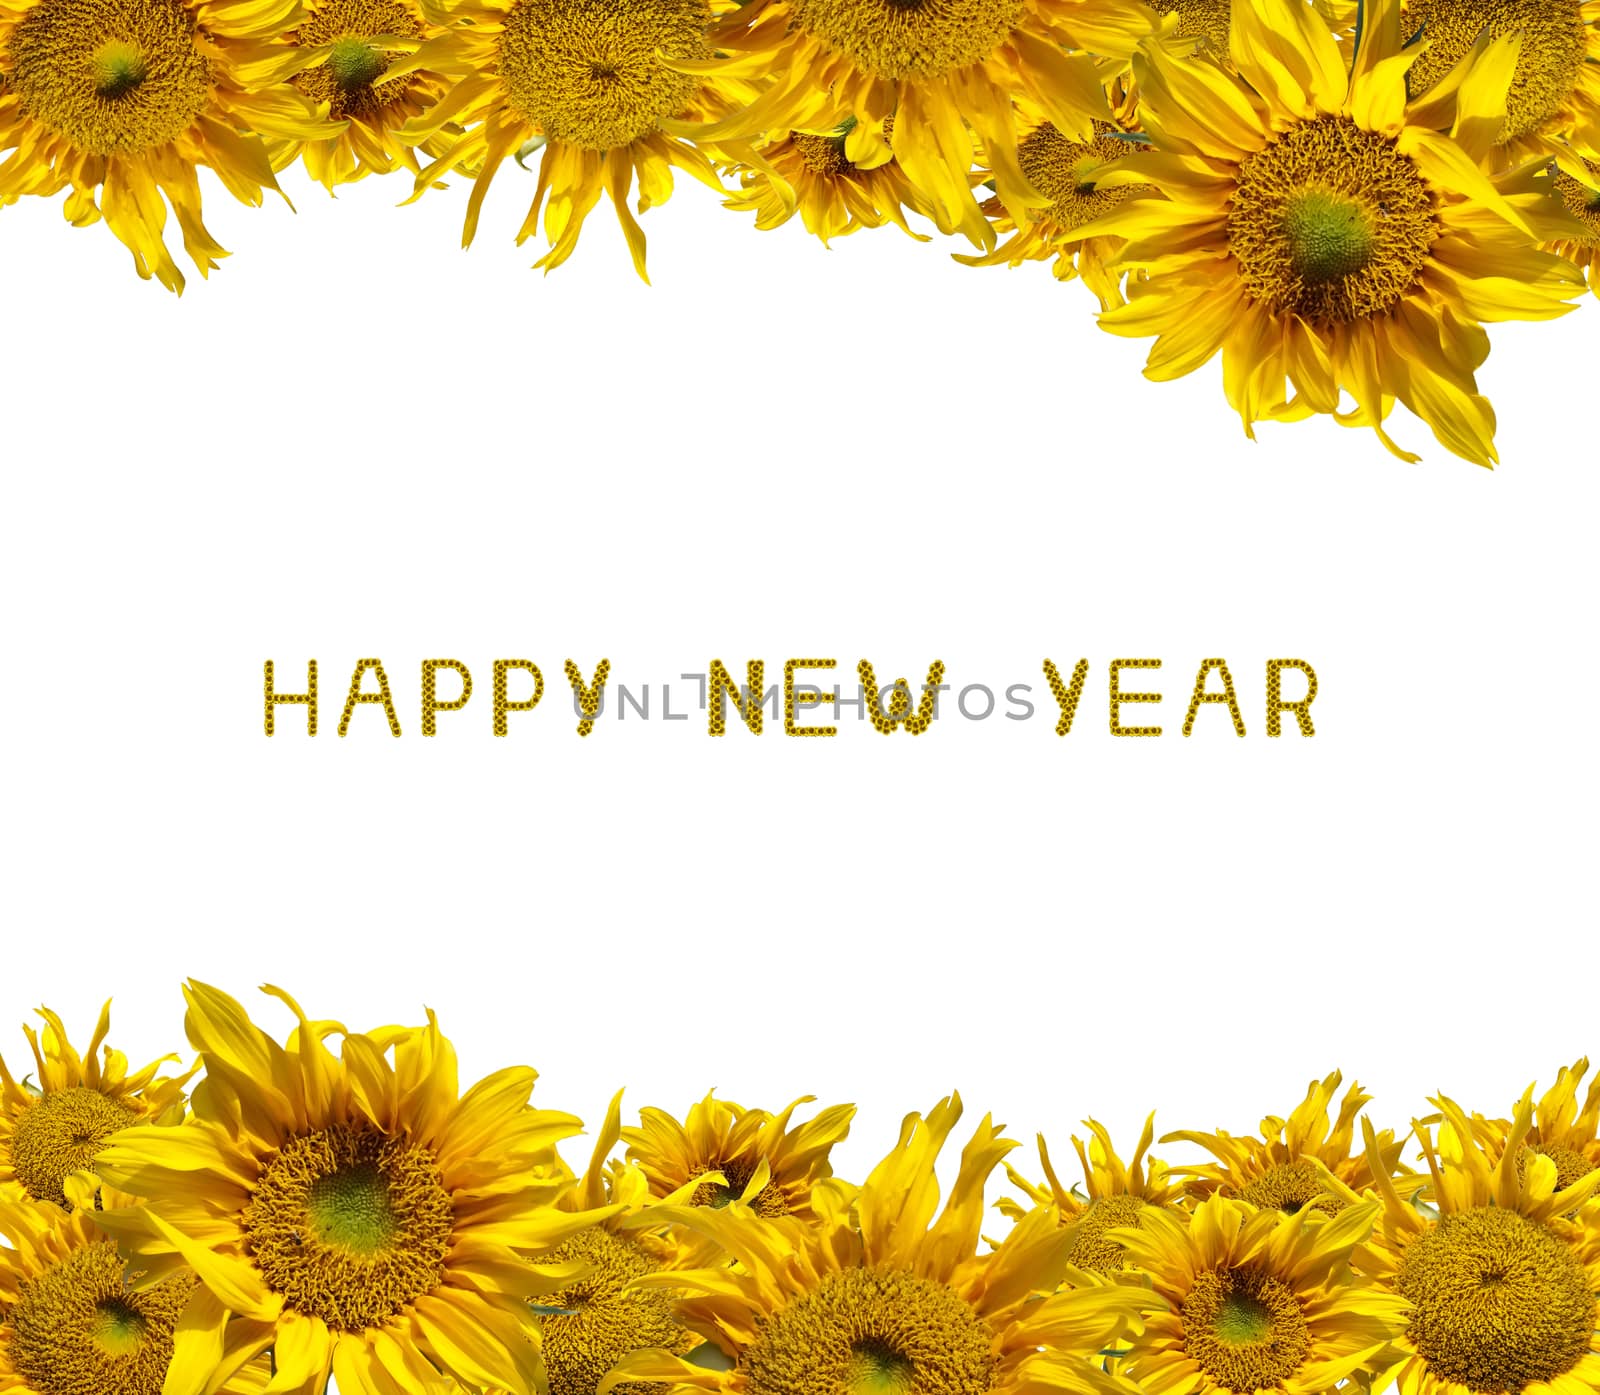 Beautiful frame of colorful sunflowers with sunflower letter arrange in the words Happy New Year, clipping path included.